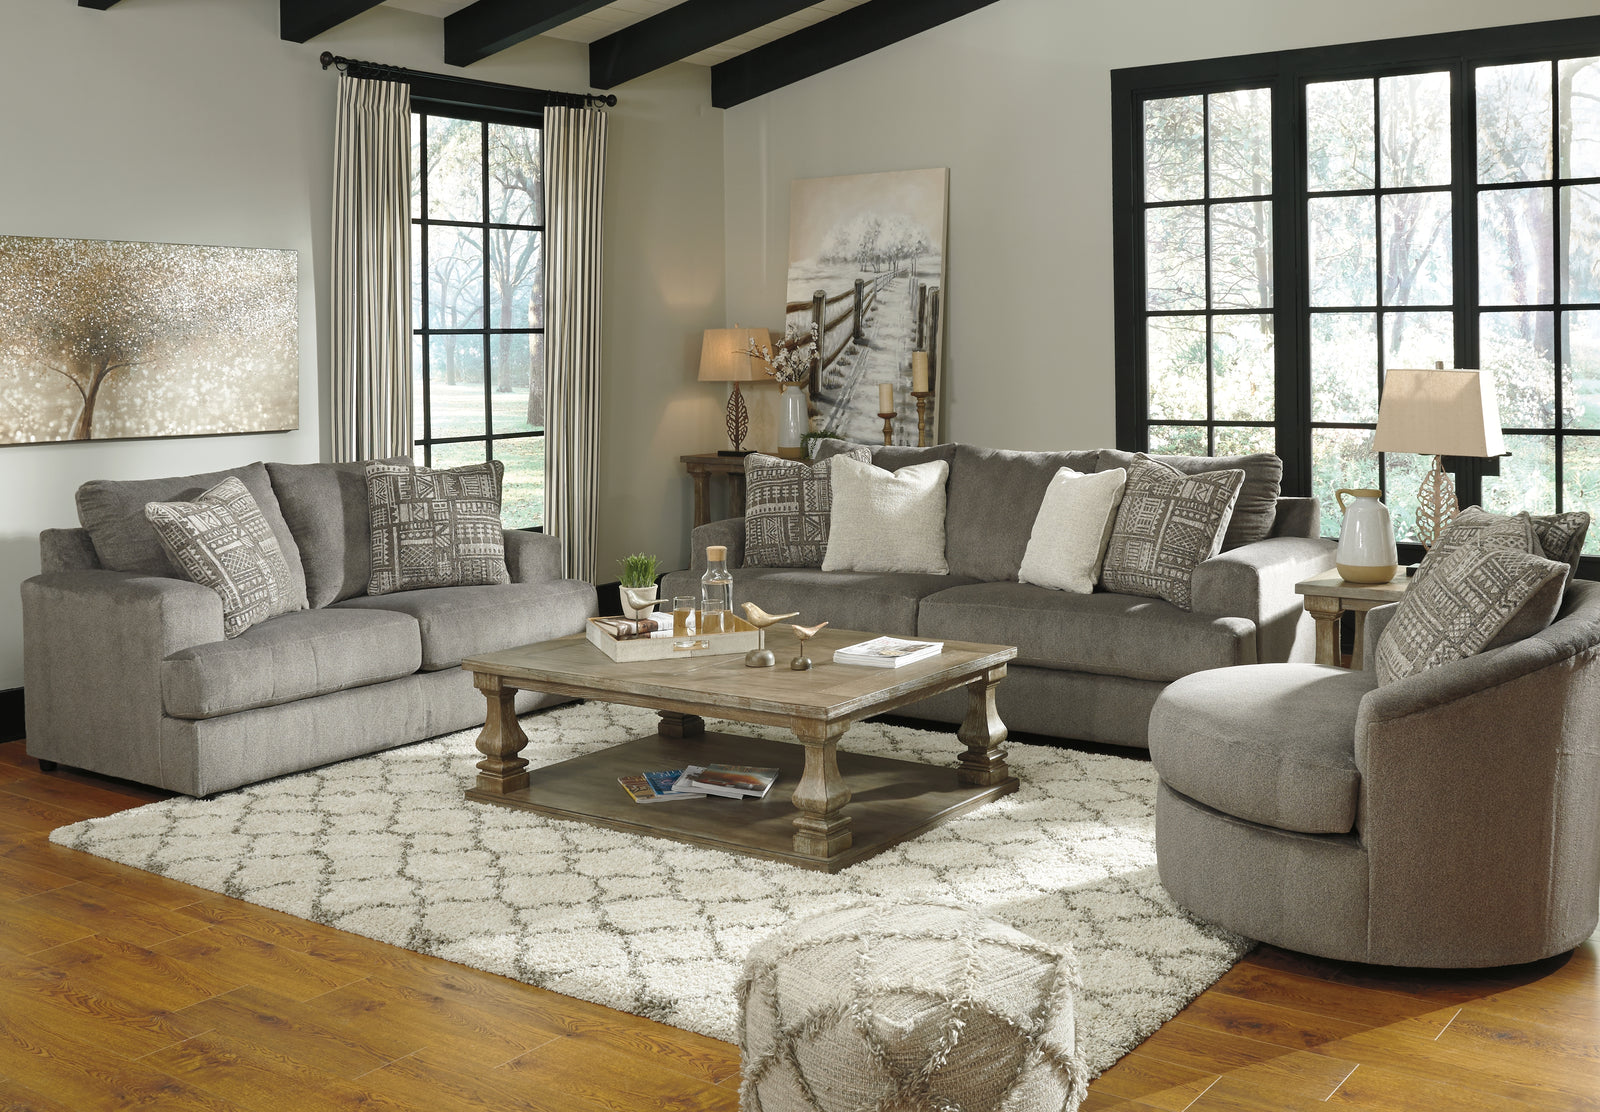 Soletren Ash Sofa, Loveseat And Chair